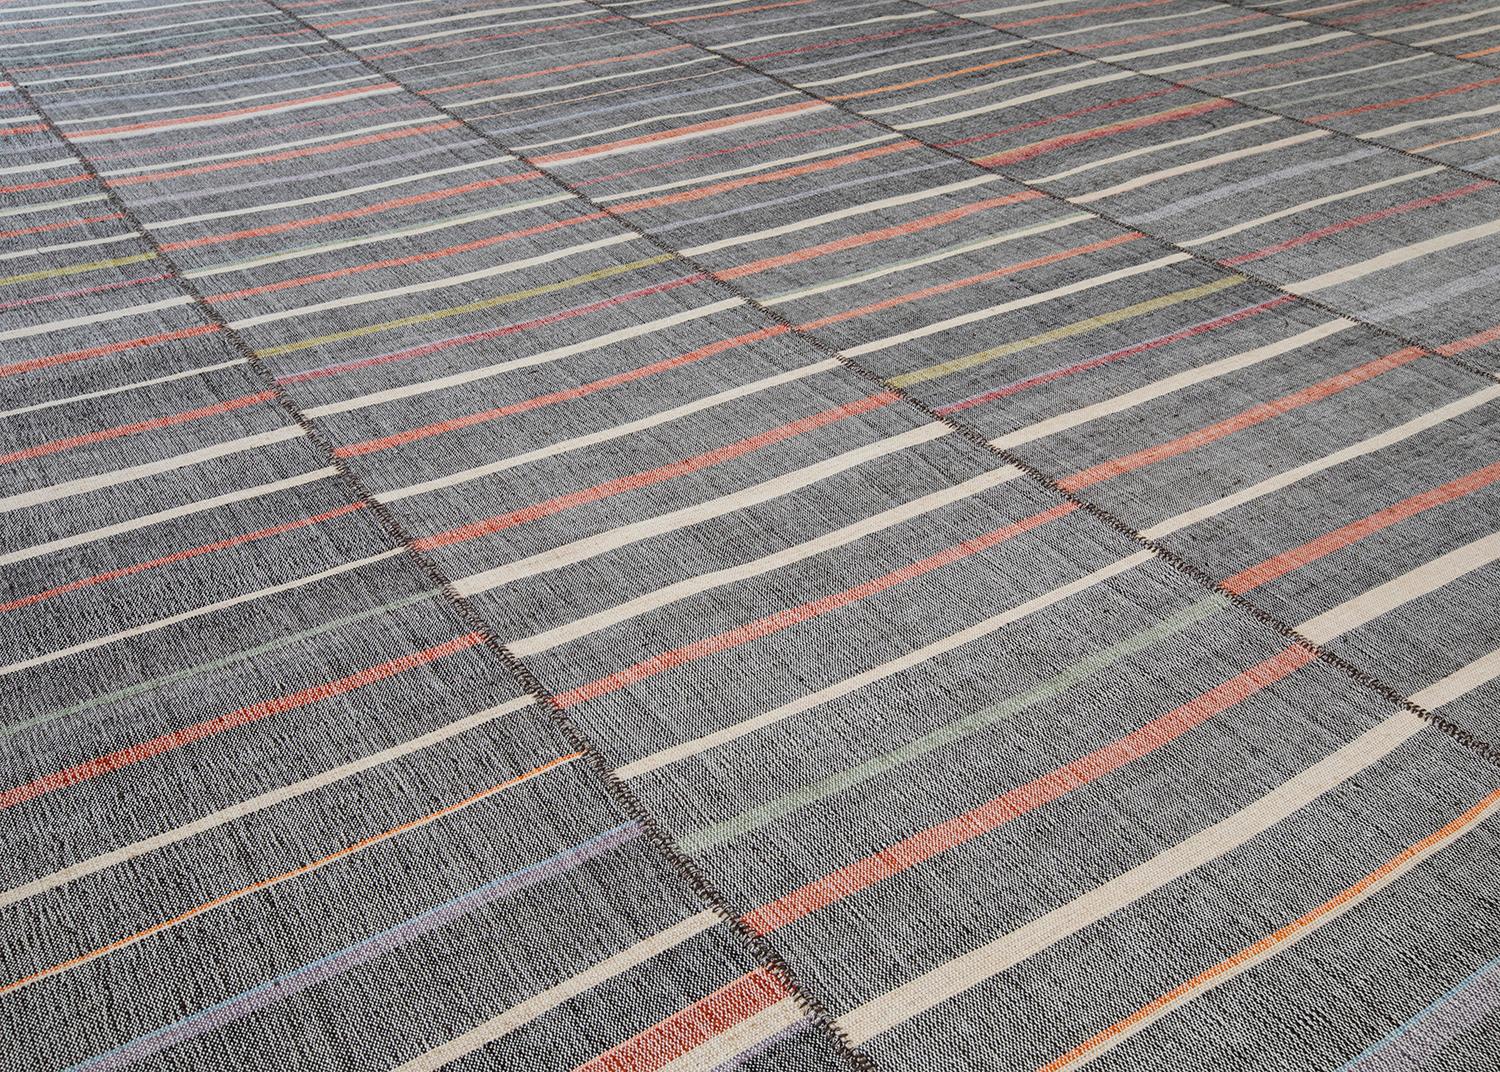 This Pelas flatweave rug is made with handspun wool and natural dyes.  It is inspired by the antique kilims that are native to the Kurdish region in Iran.  NASIRI continues their rich tradition of rug making by applying the same techniques and